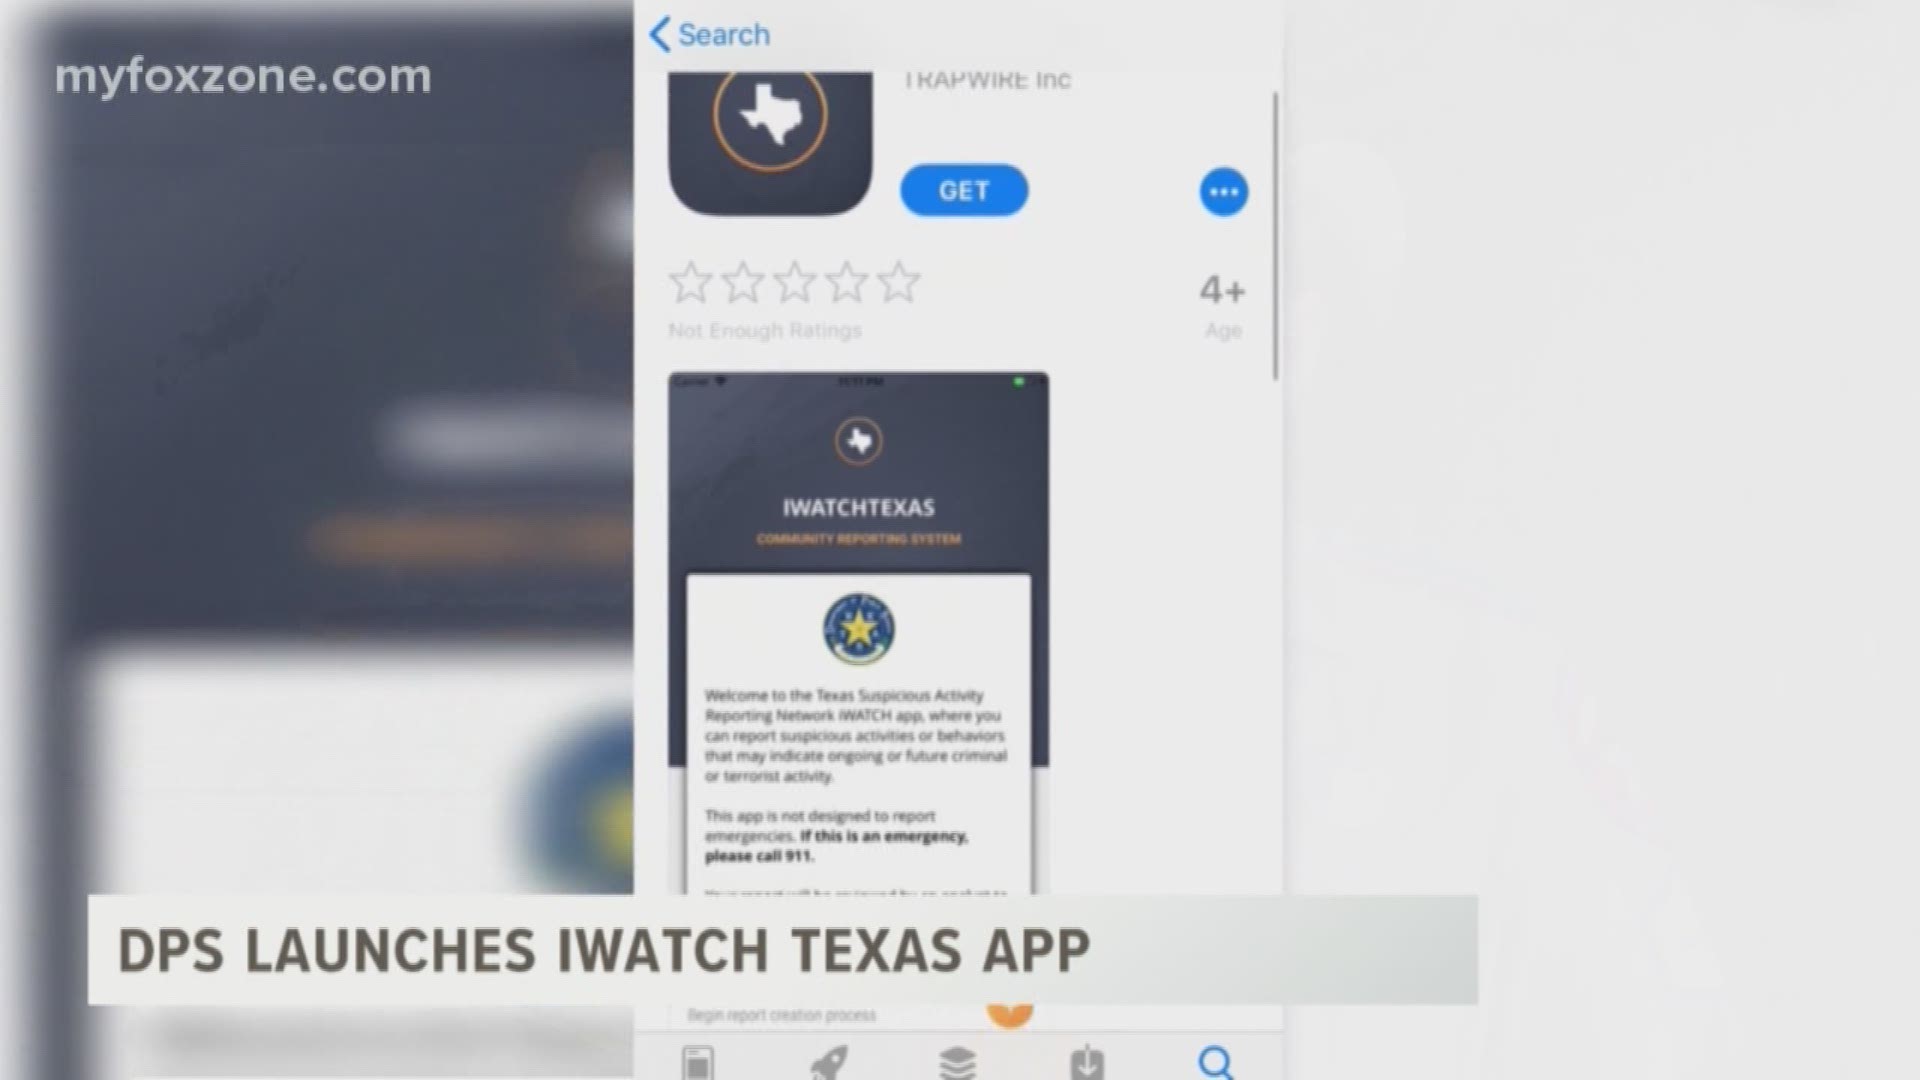 DPS Launches iWatch Texas App